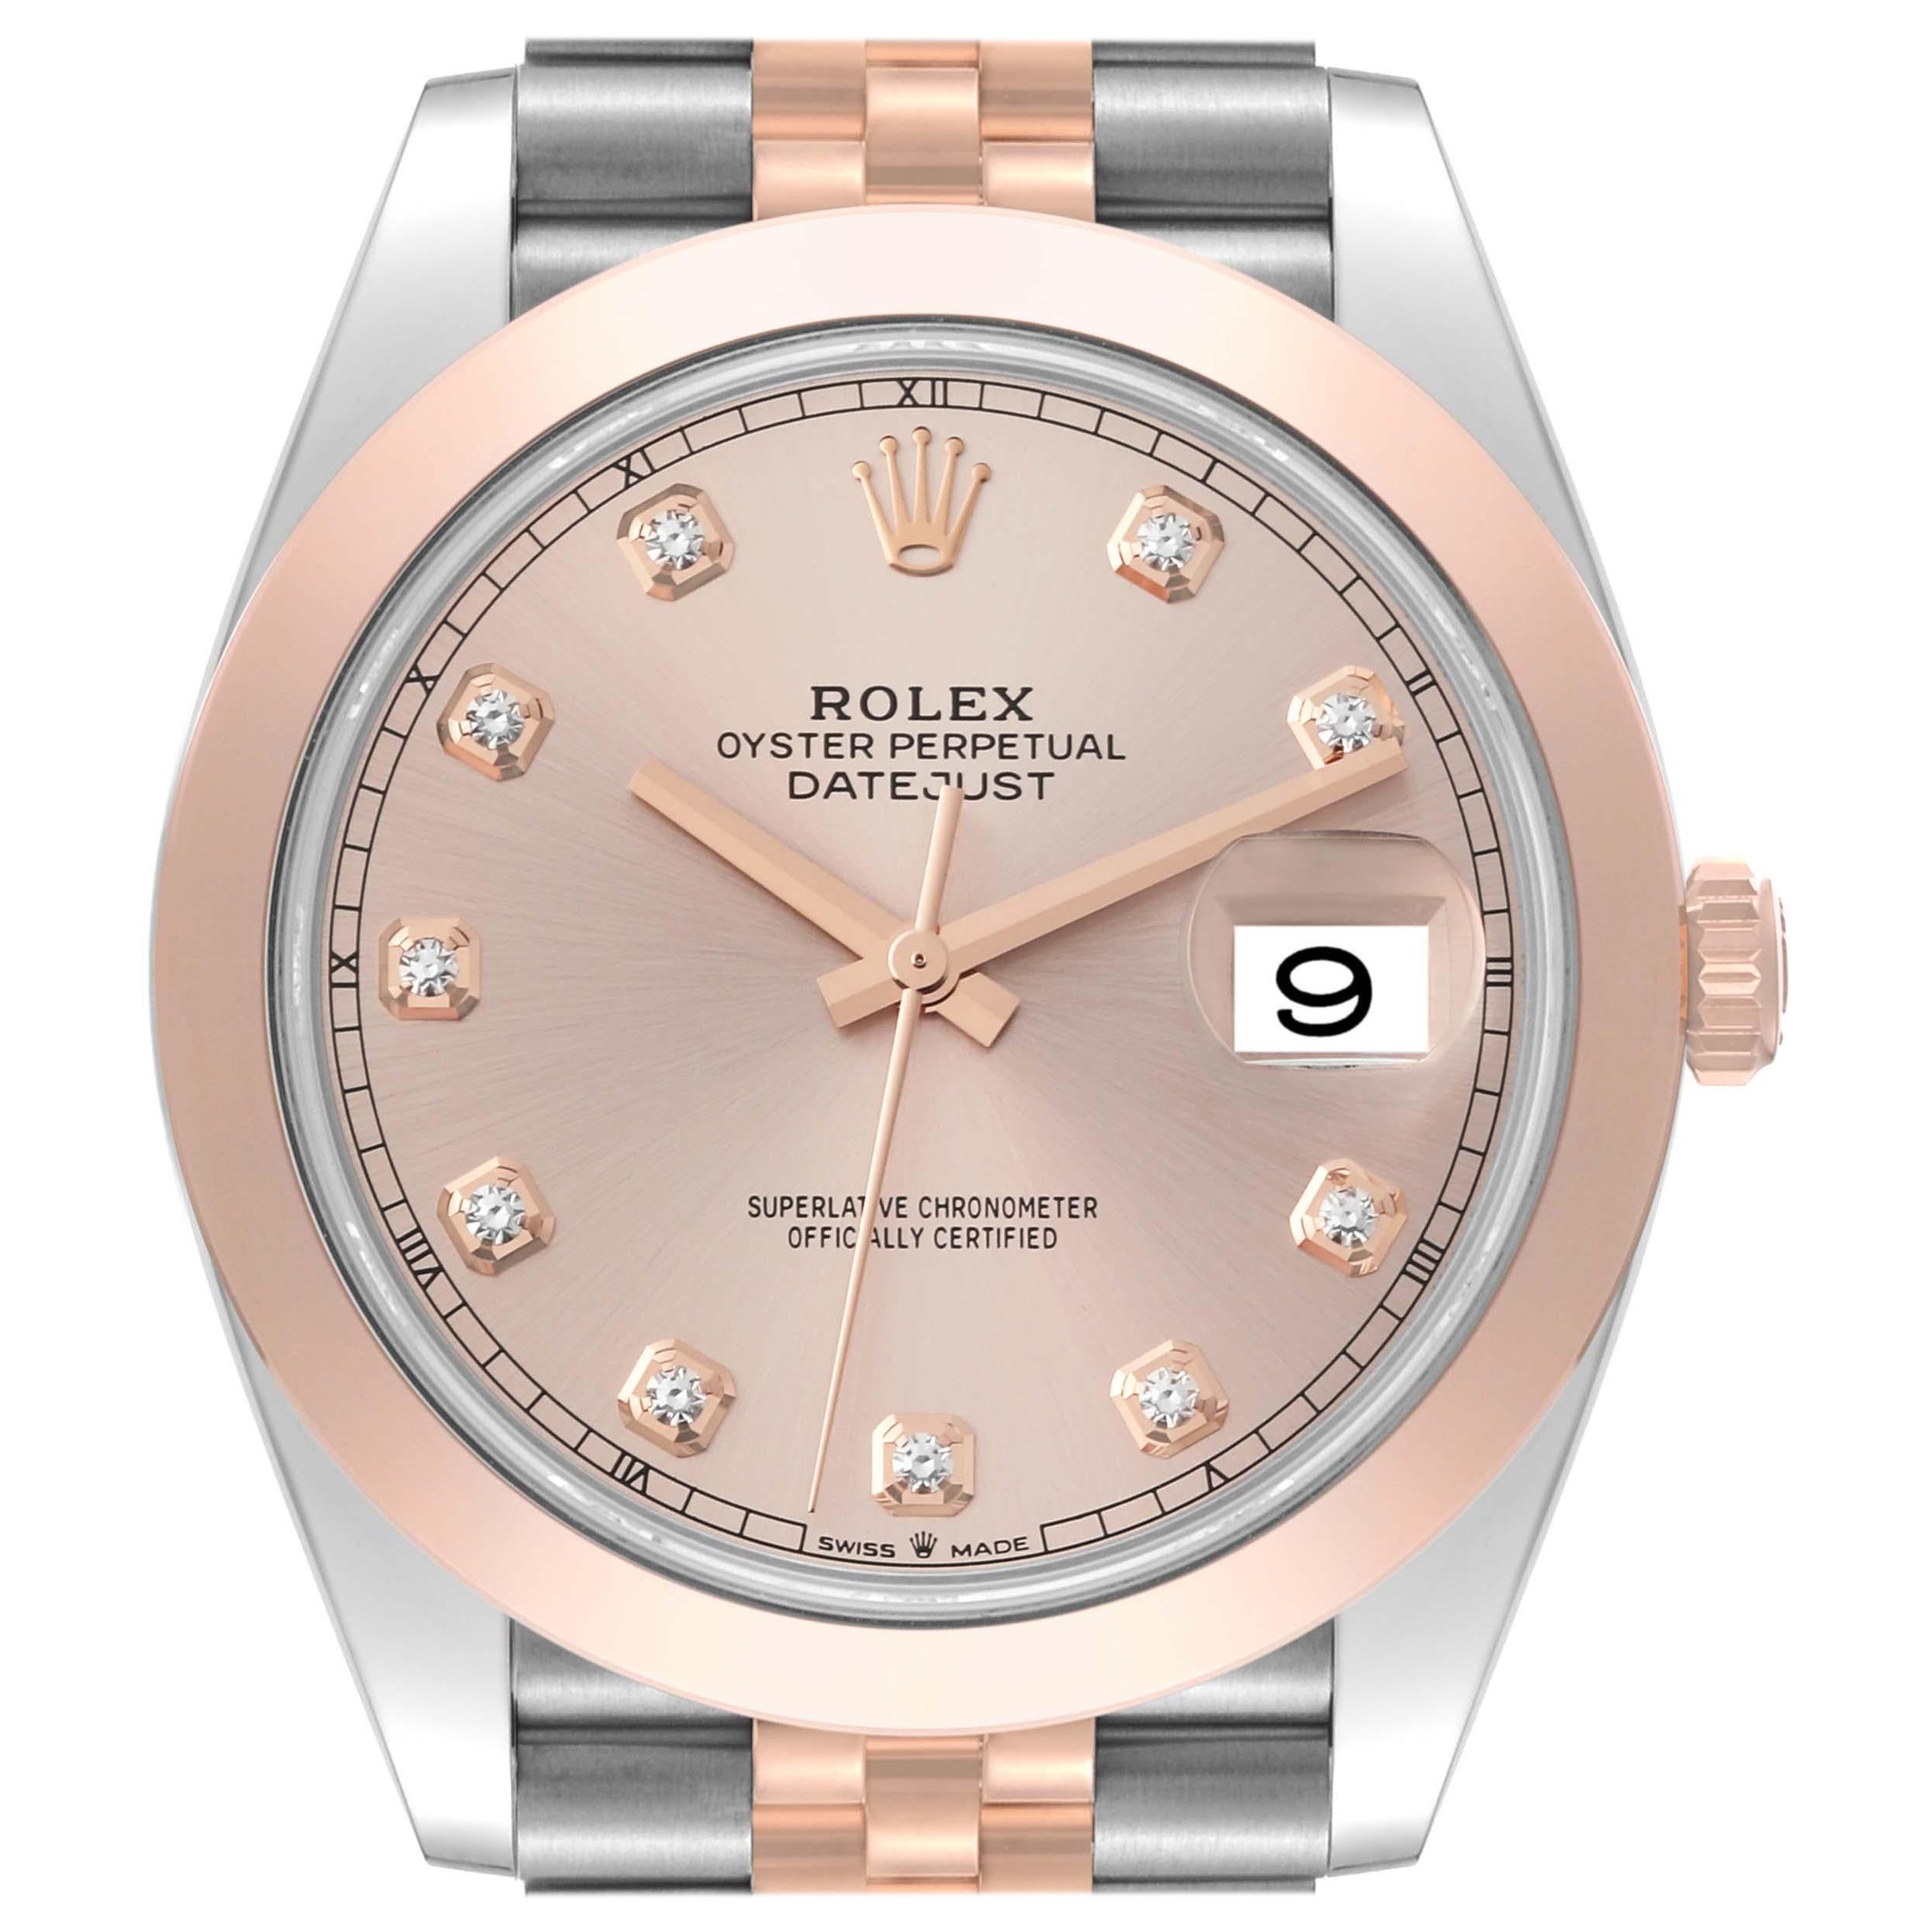 Rolex Datejust 41 Steel Rose Gold Diamond Dial Mens Watch 126301 Box Card For Sale